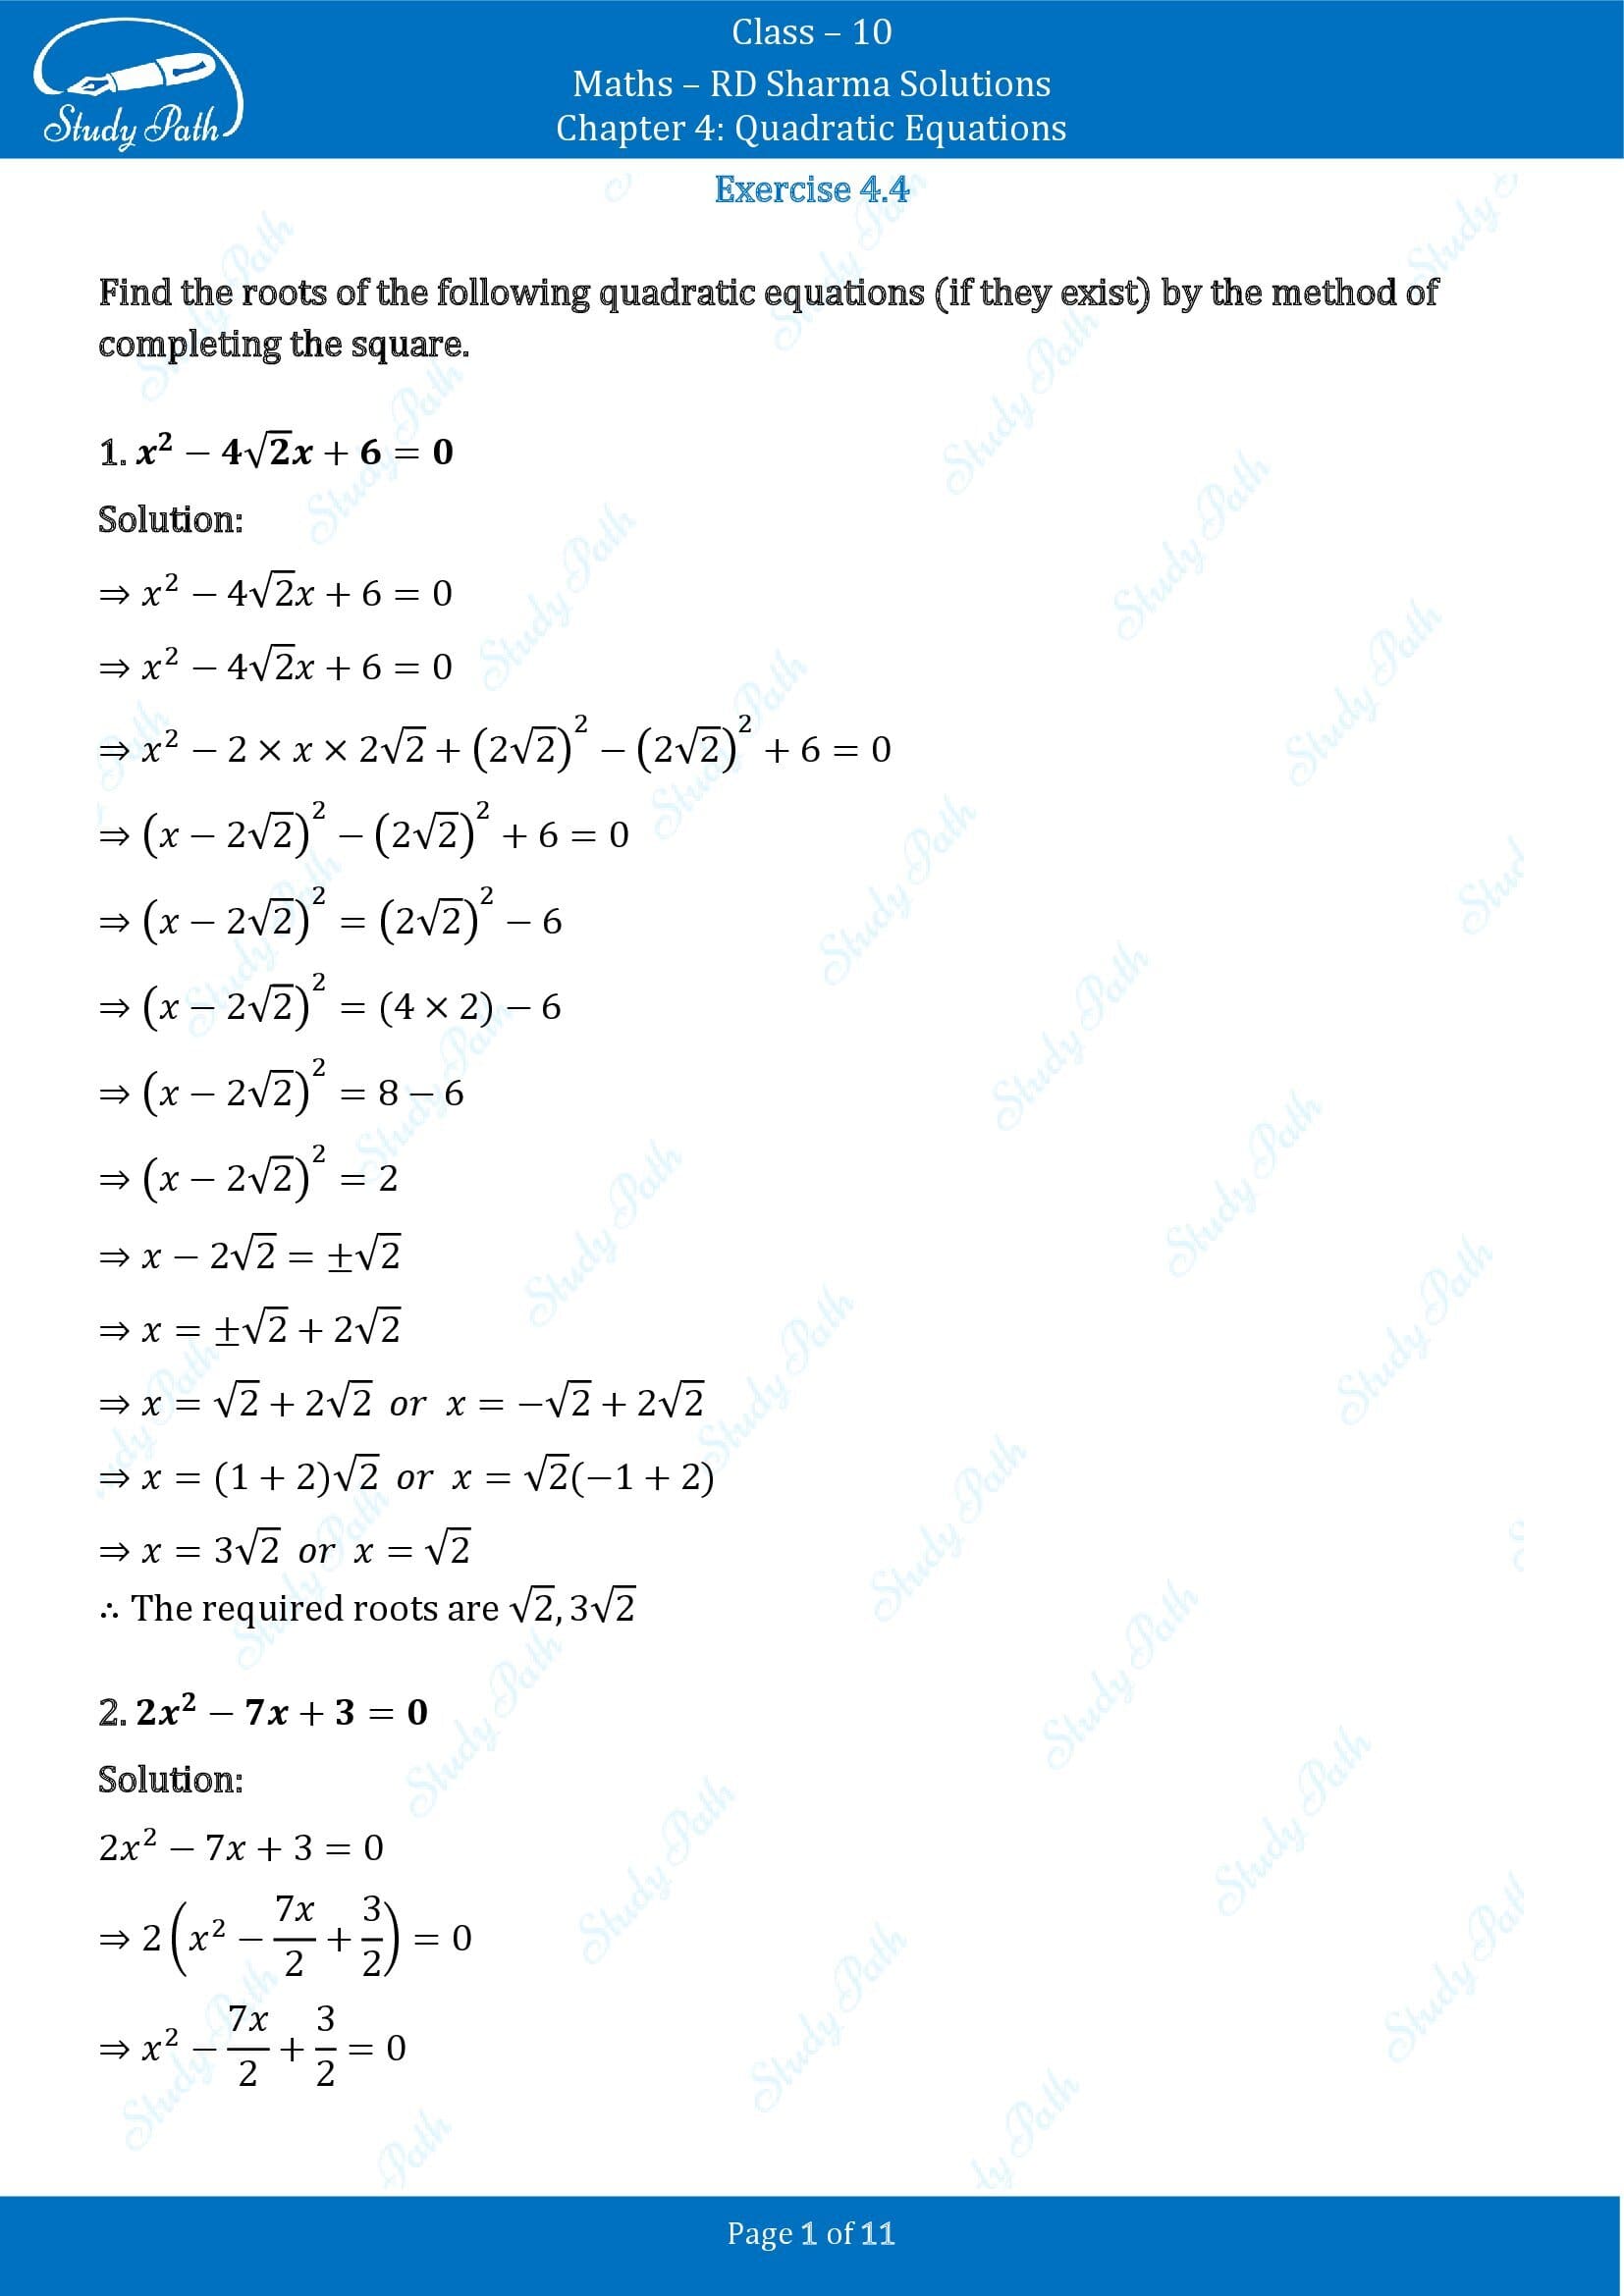 RD Sharma Solutions Class 10 Chapter 4 Quadratic Equations Exercise 4.4 00001